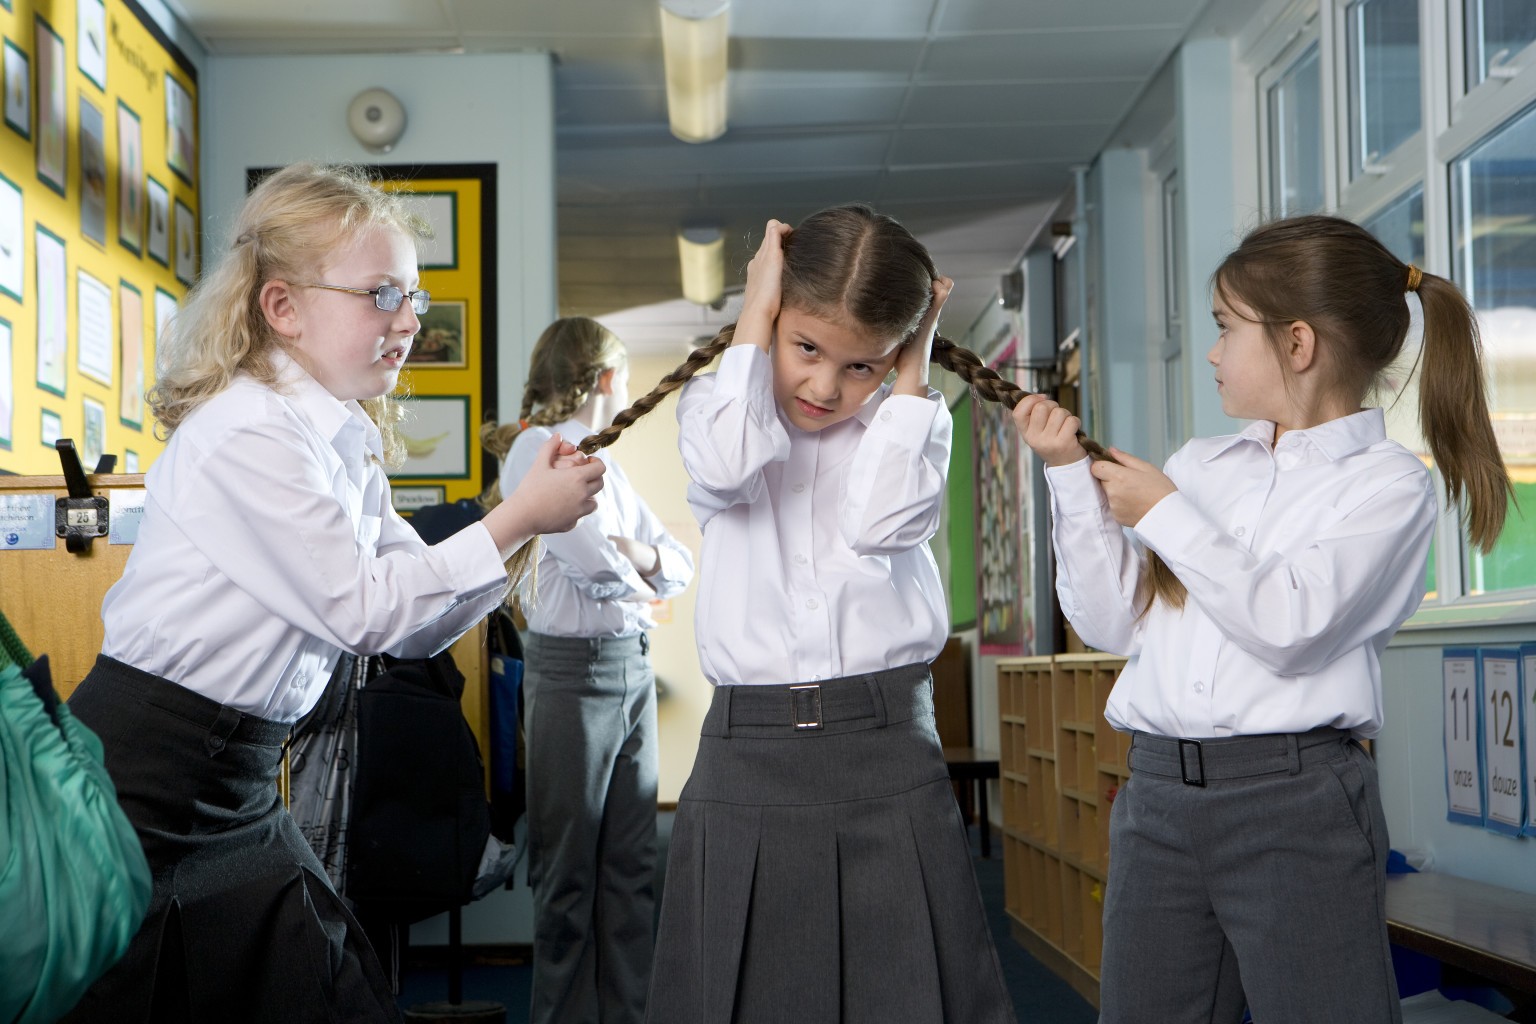 Why School Girls Fight at School: 10 Unthinkable Reasons